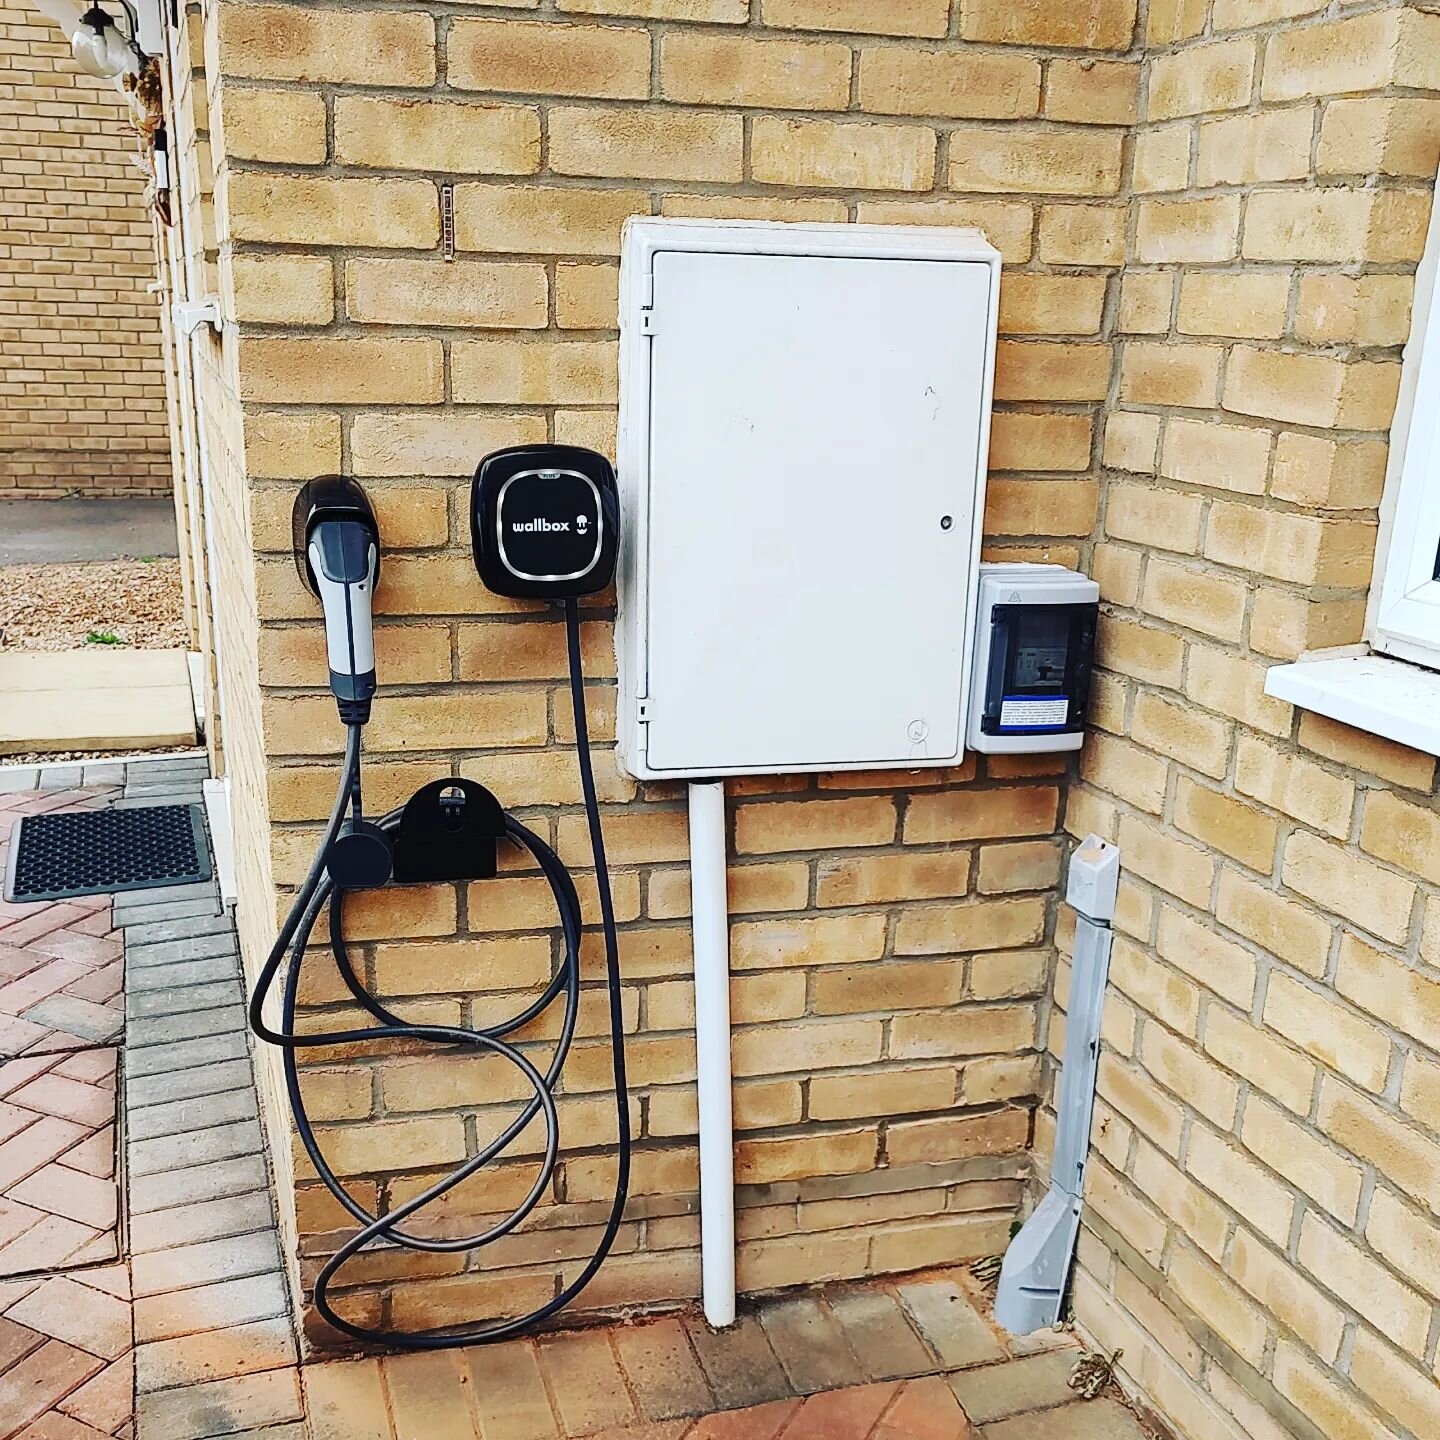 Installation of a @wallboxchargers charger this morning #ev #evchargermidlands #evchargernorthampton #evinstallationnorthampton #evbedford